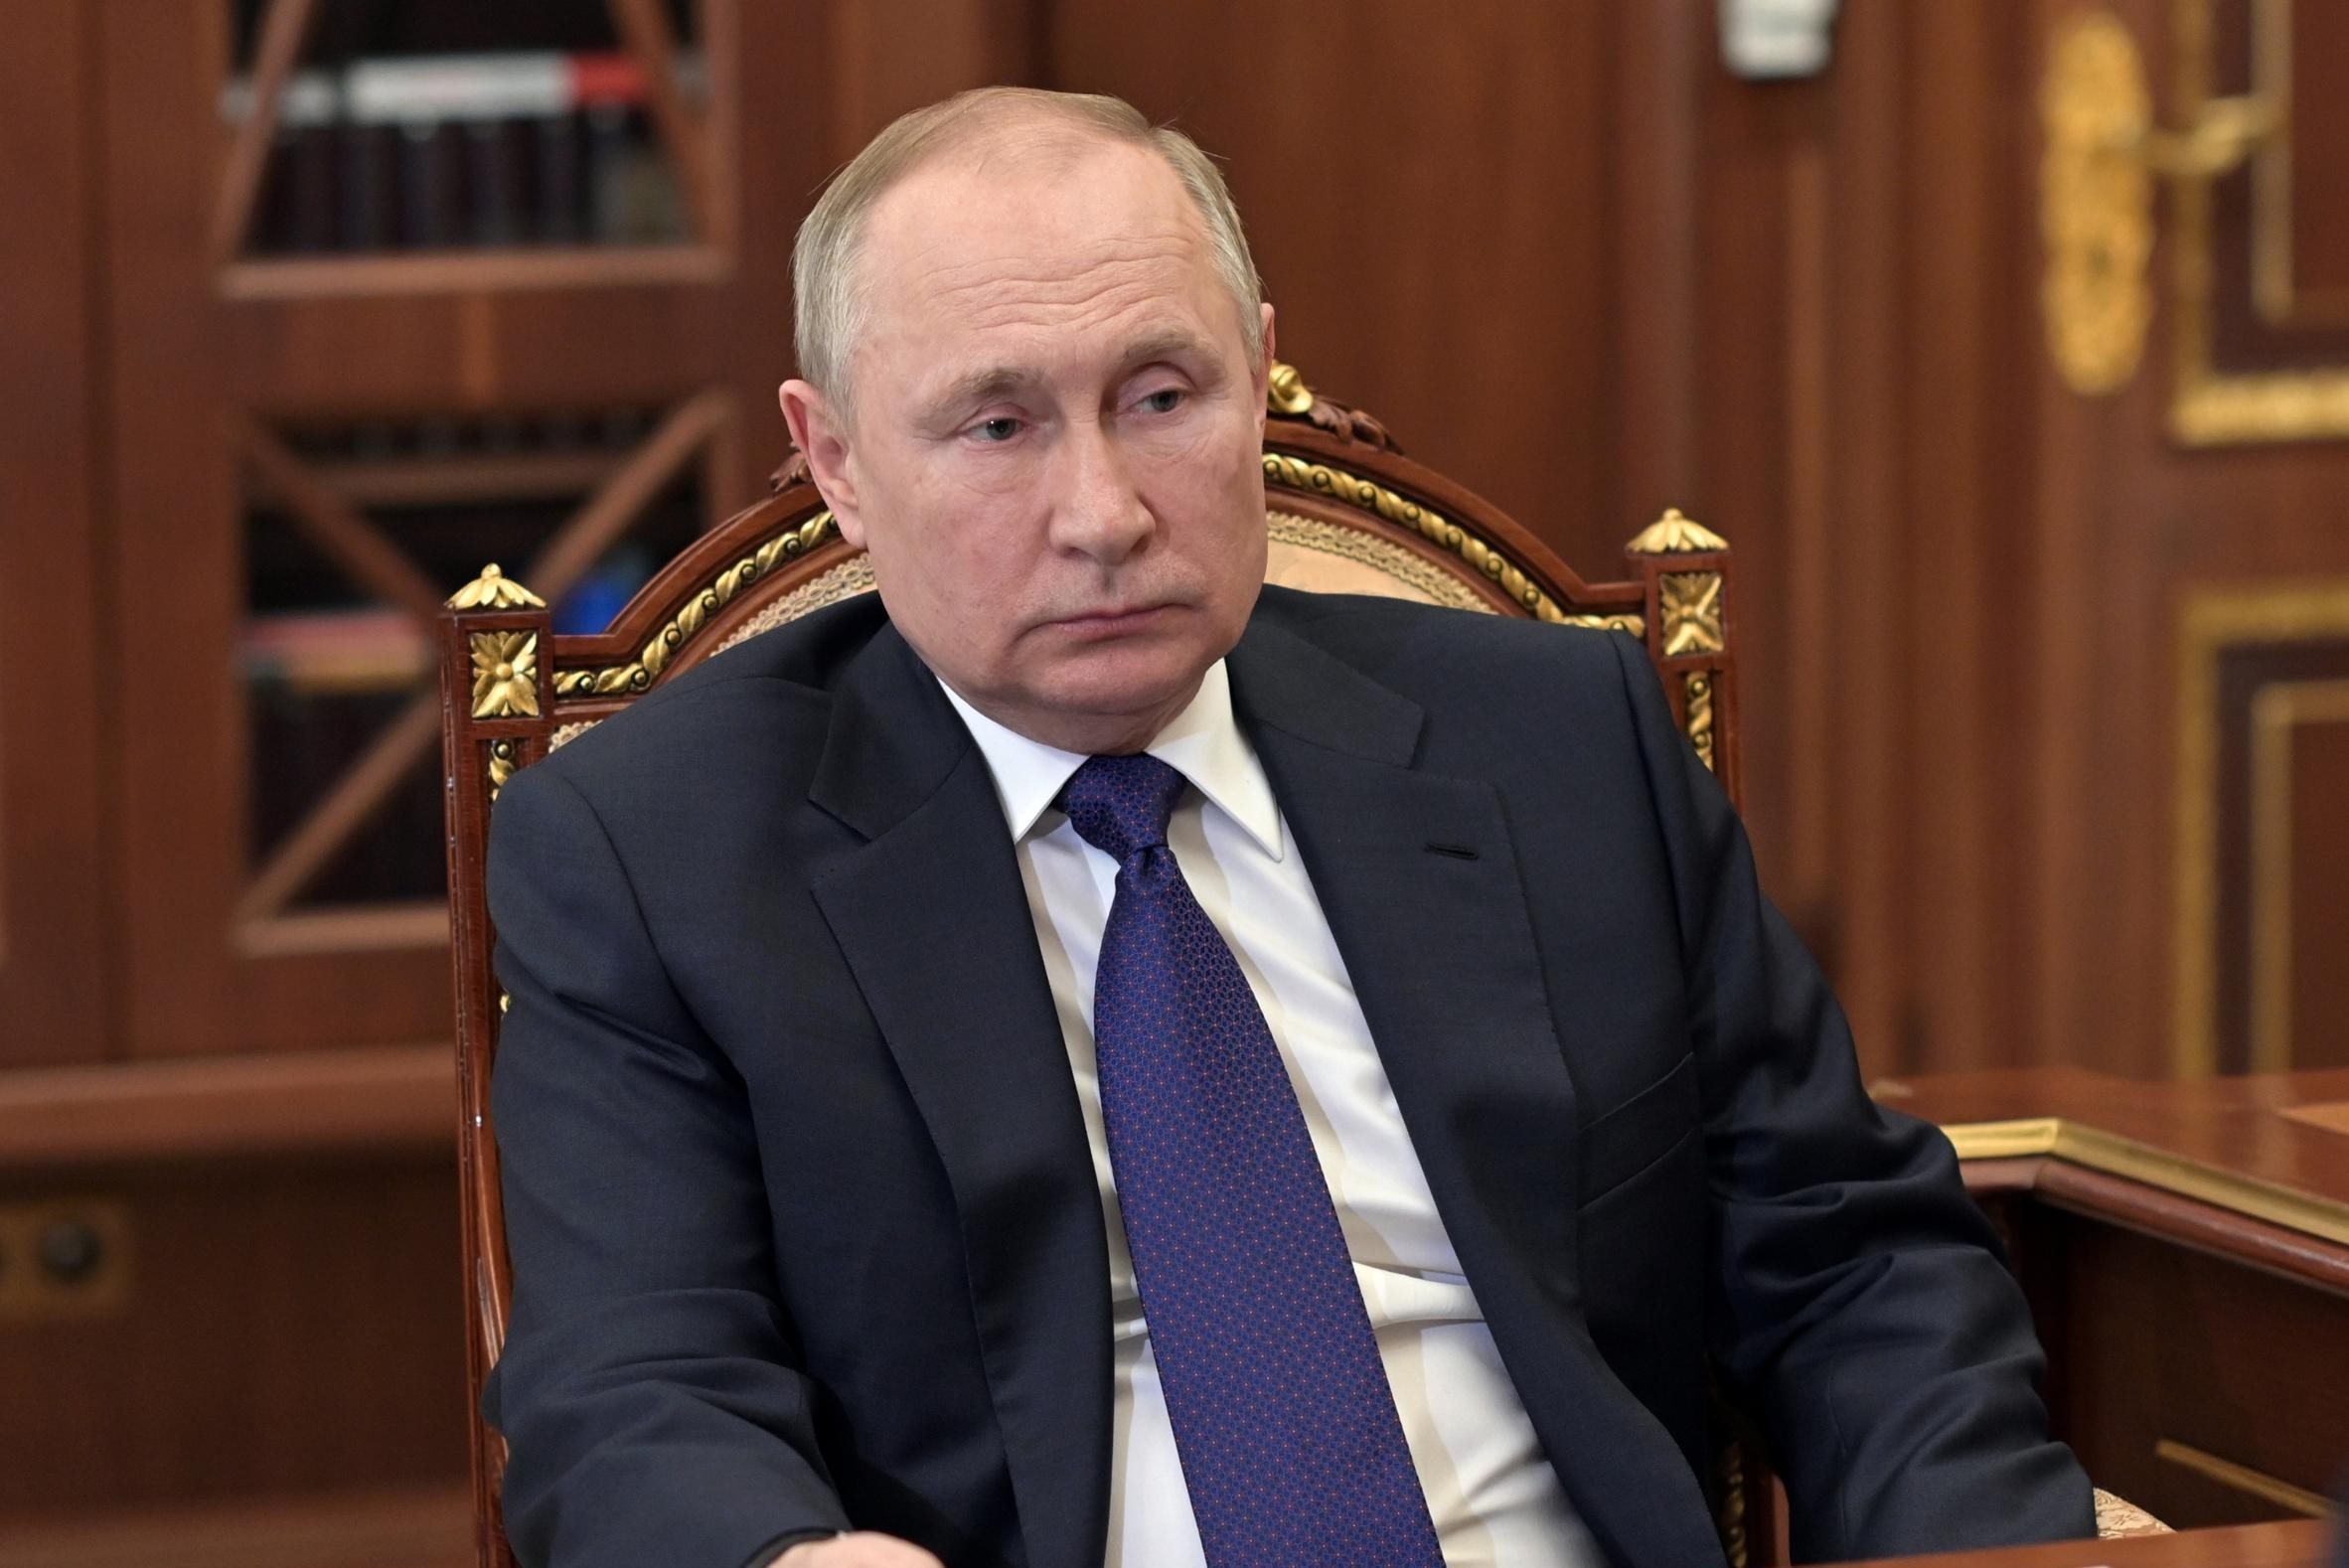 Putin tightens rules on spreading “false information” even further